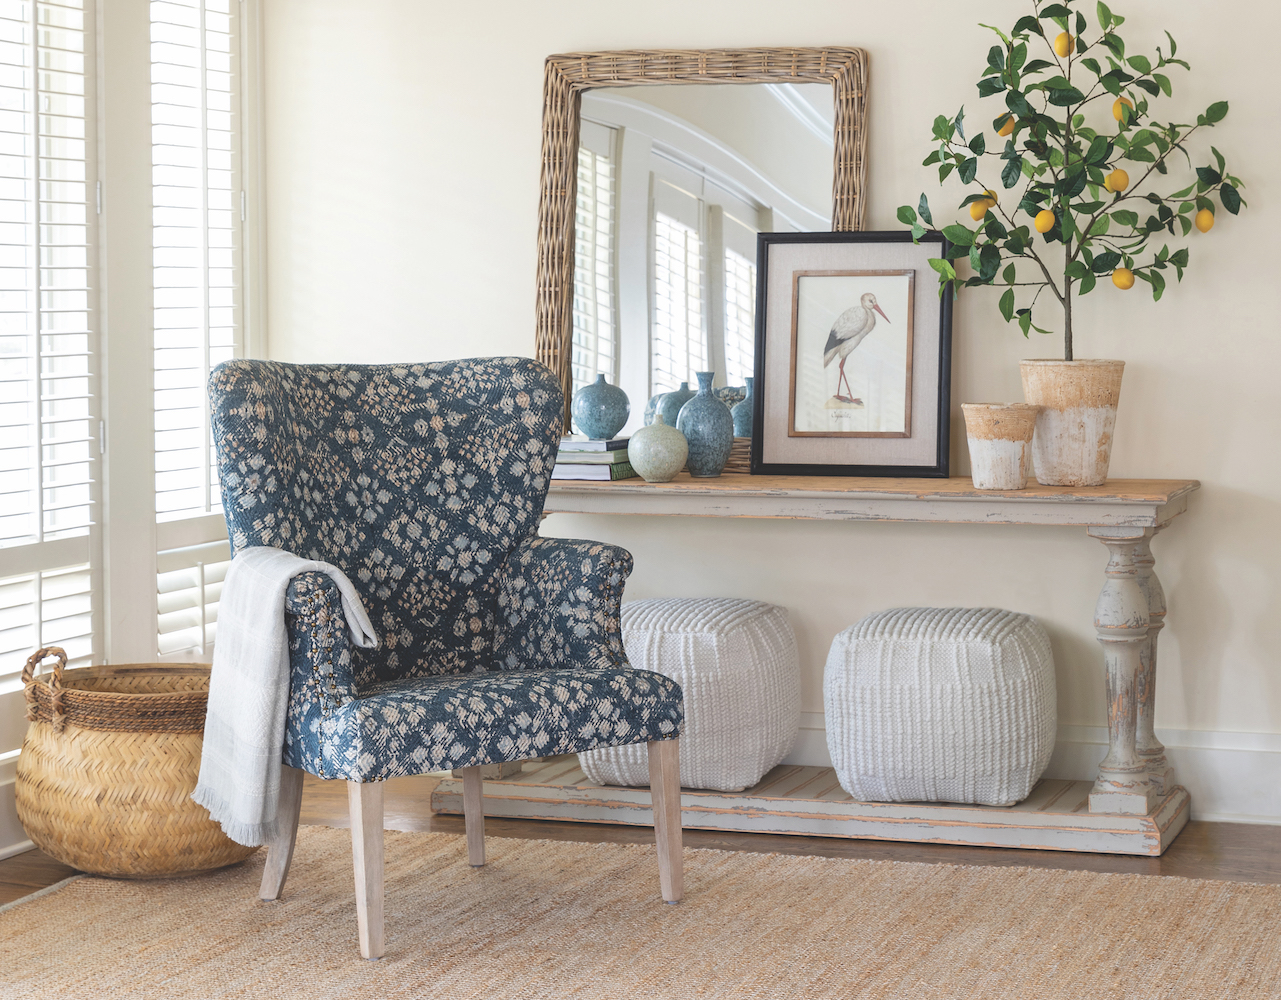 The Estella upholstered arm chair from Park Hill.